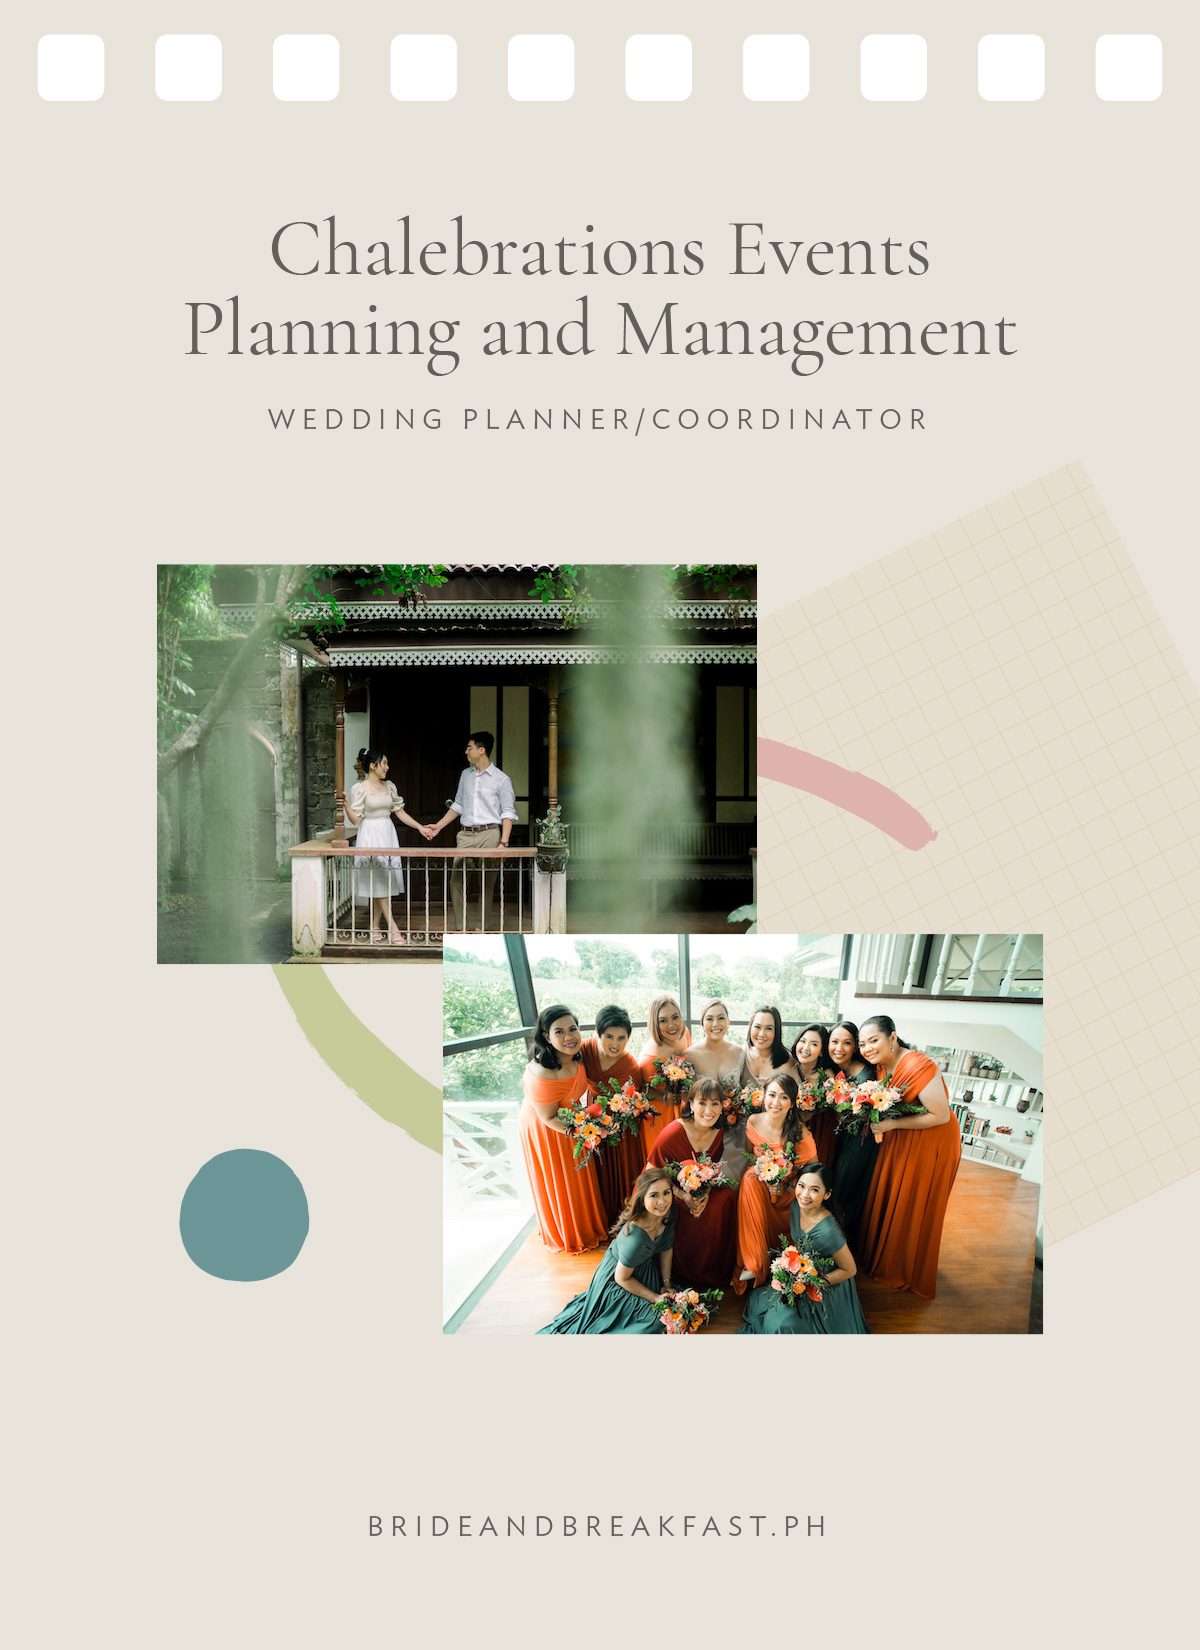 Chalebrations Events Planning and Management